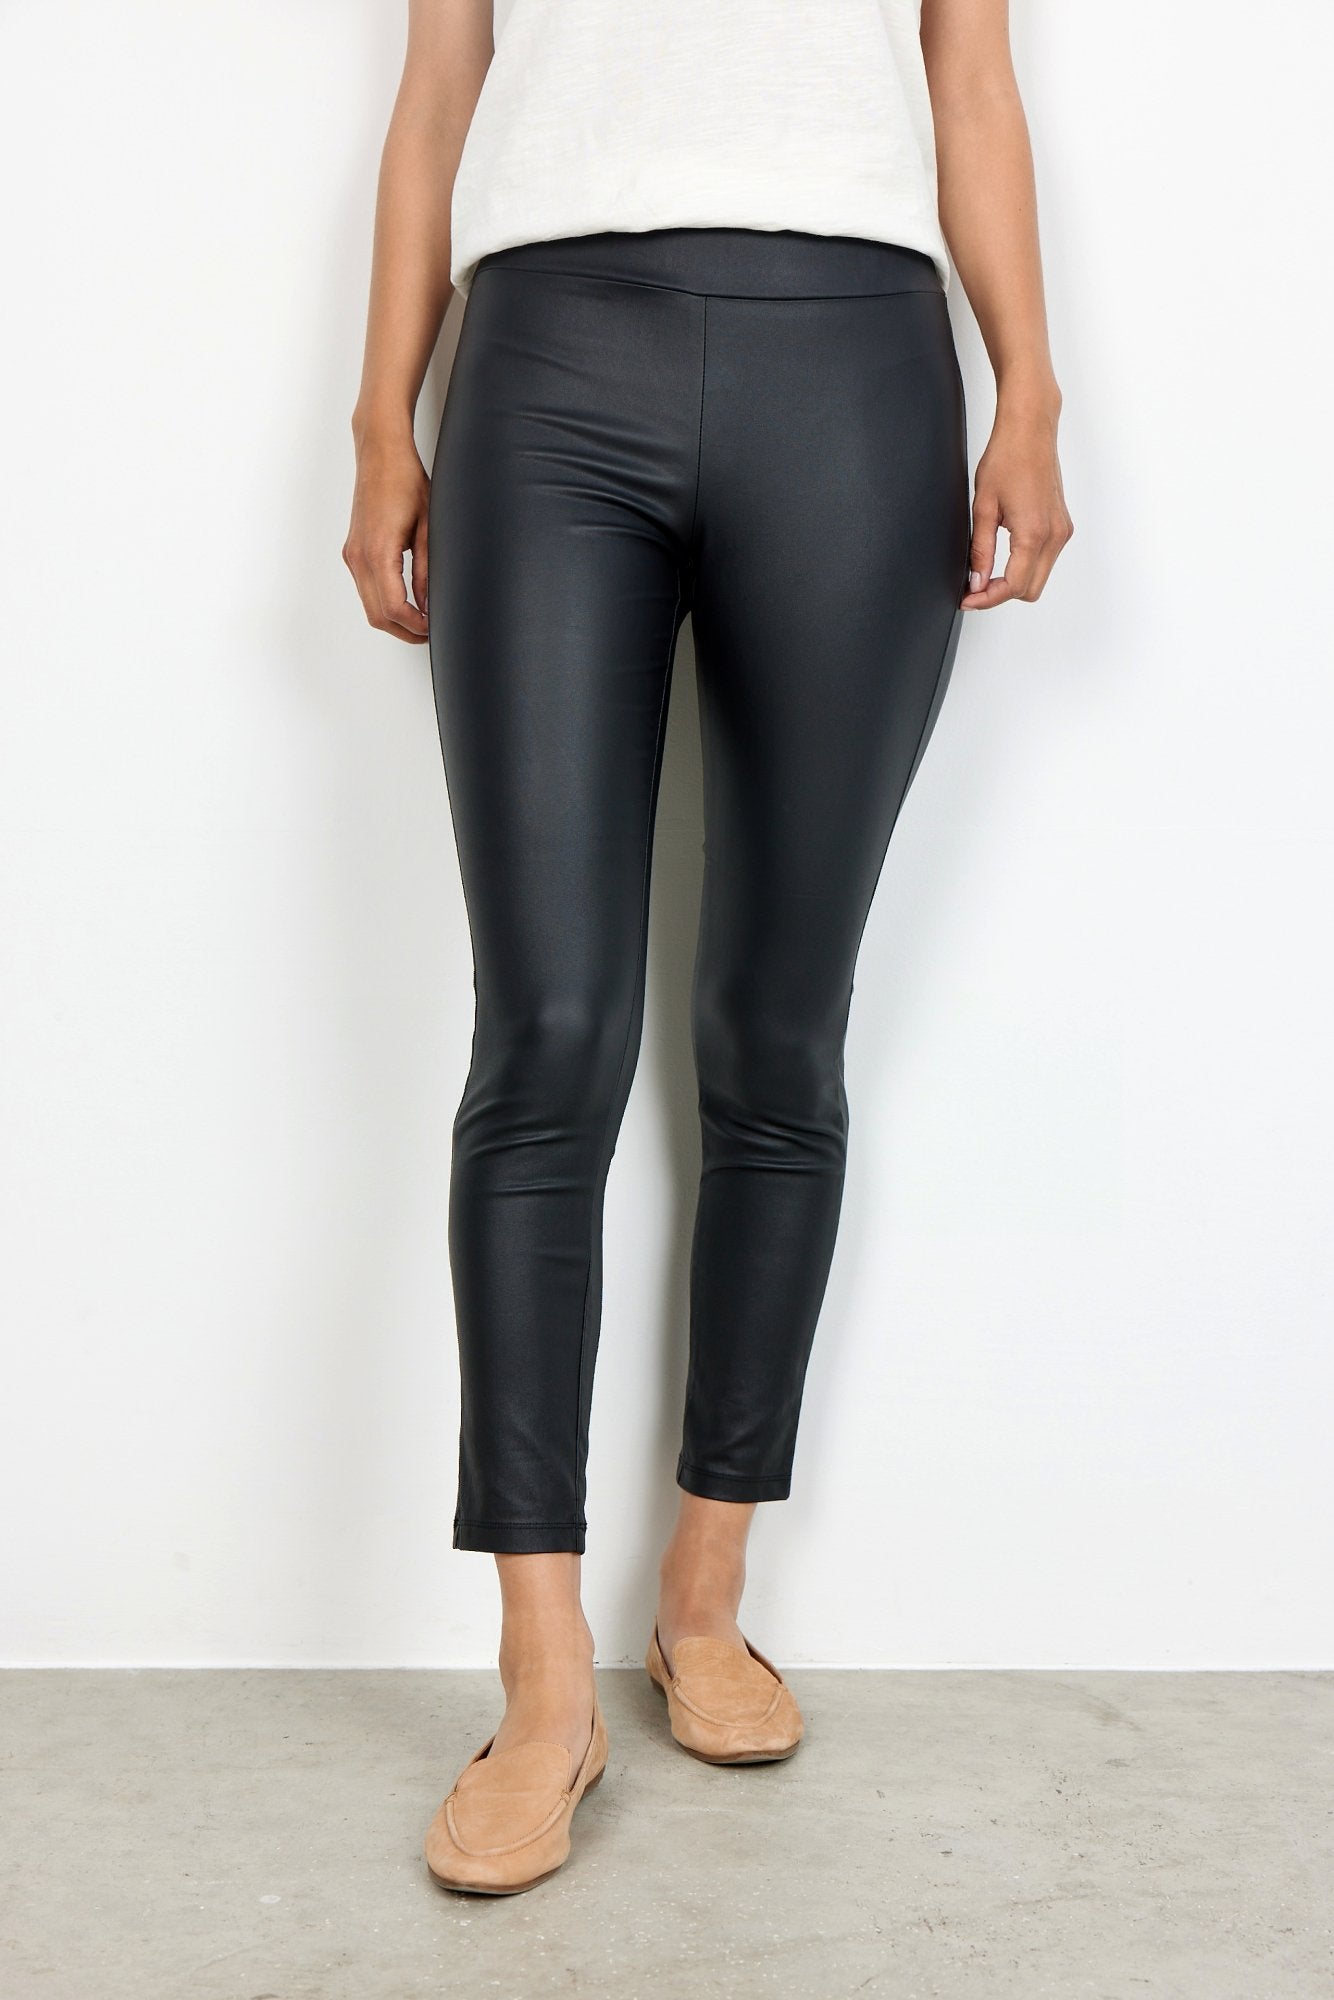 SC-PAM 2-B Pants in | soyaconcept from Soyaconcept soyaconcept – Black